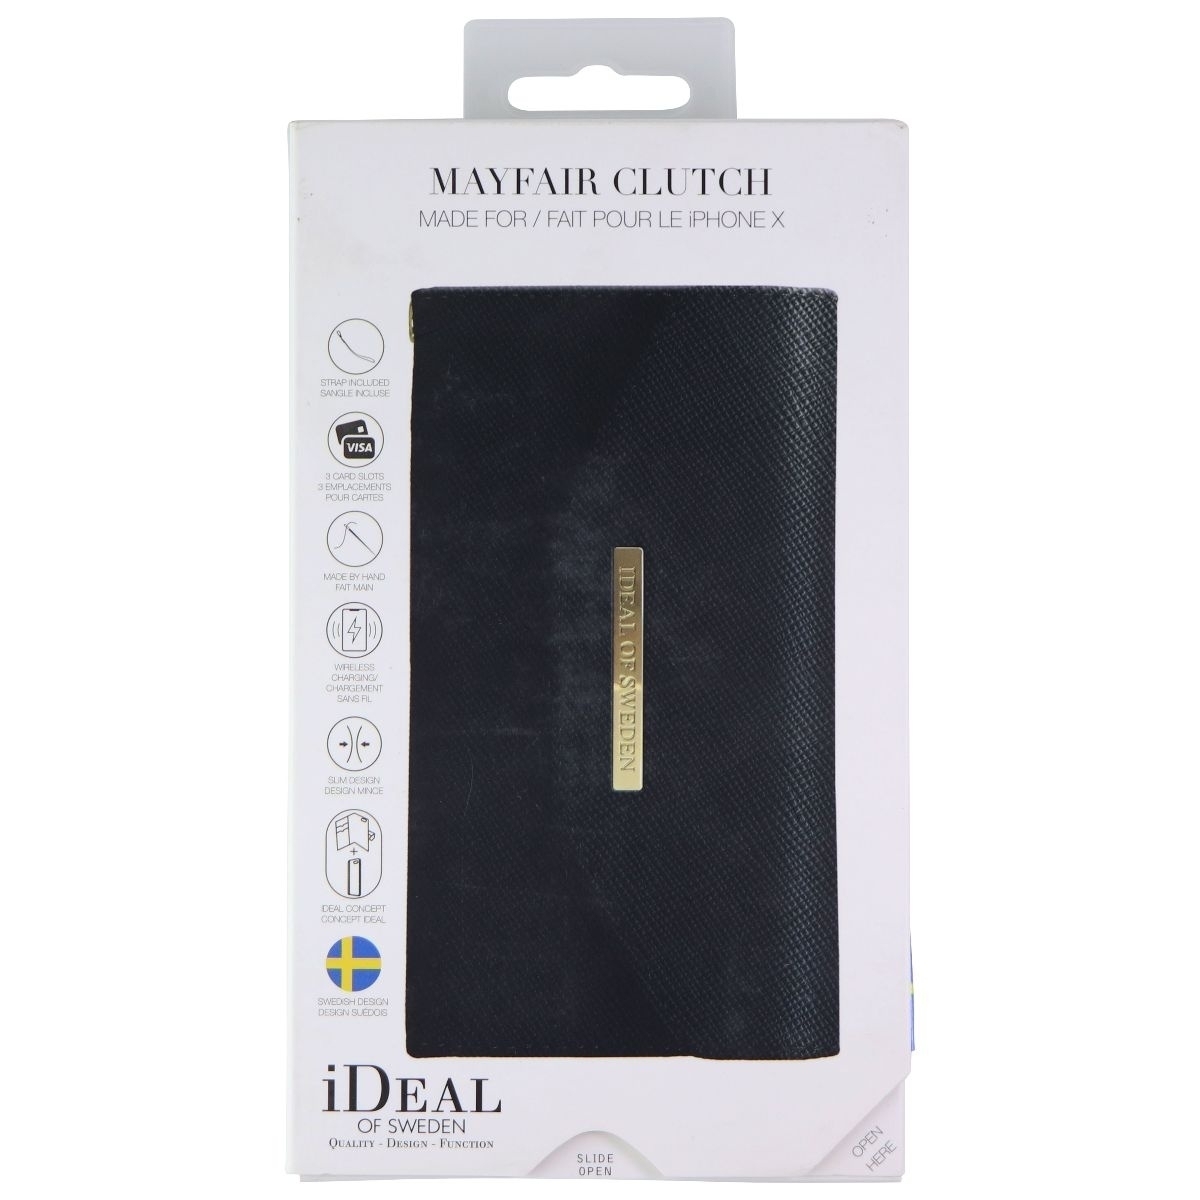 IDeal Of Sweden Mayfair Clutch Wallet Case For Apple IPhone Xs/X - Black